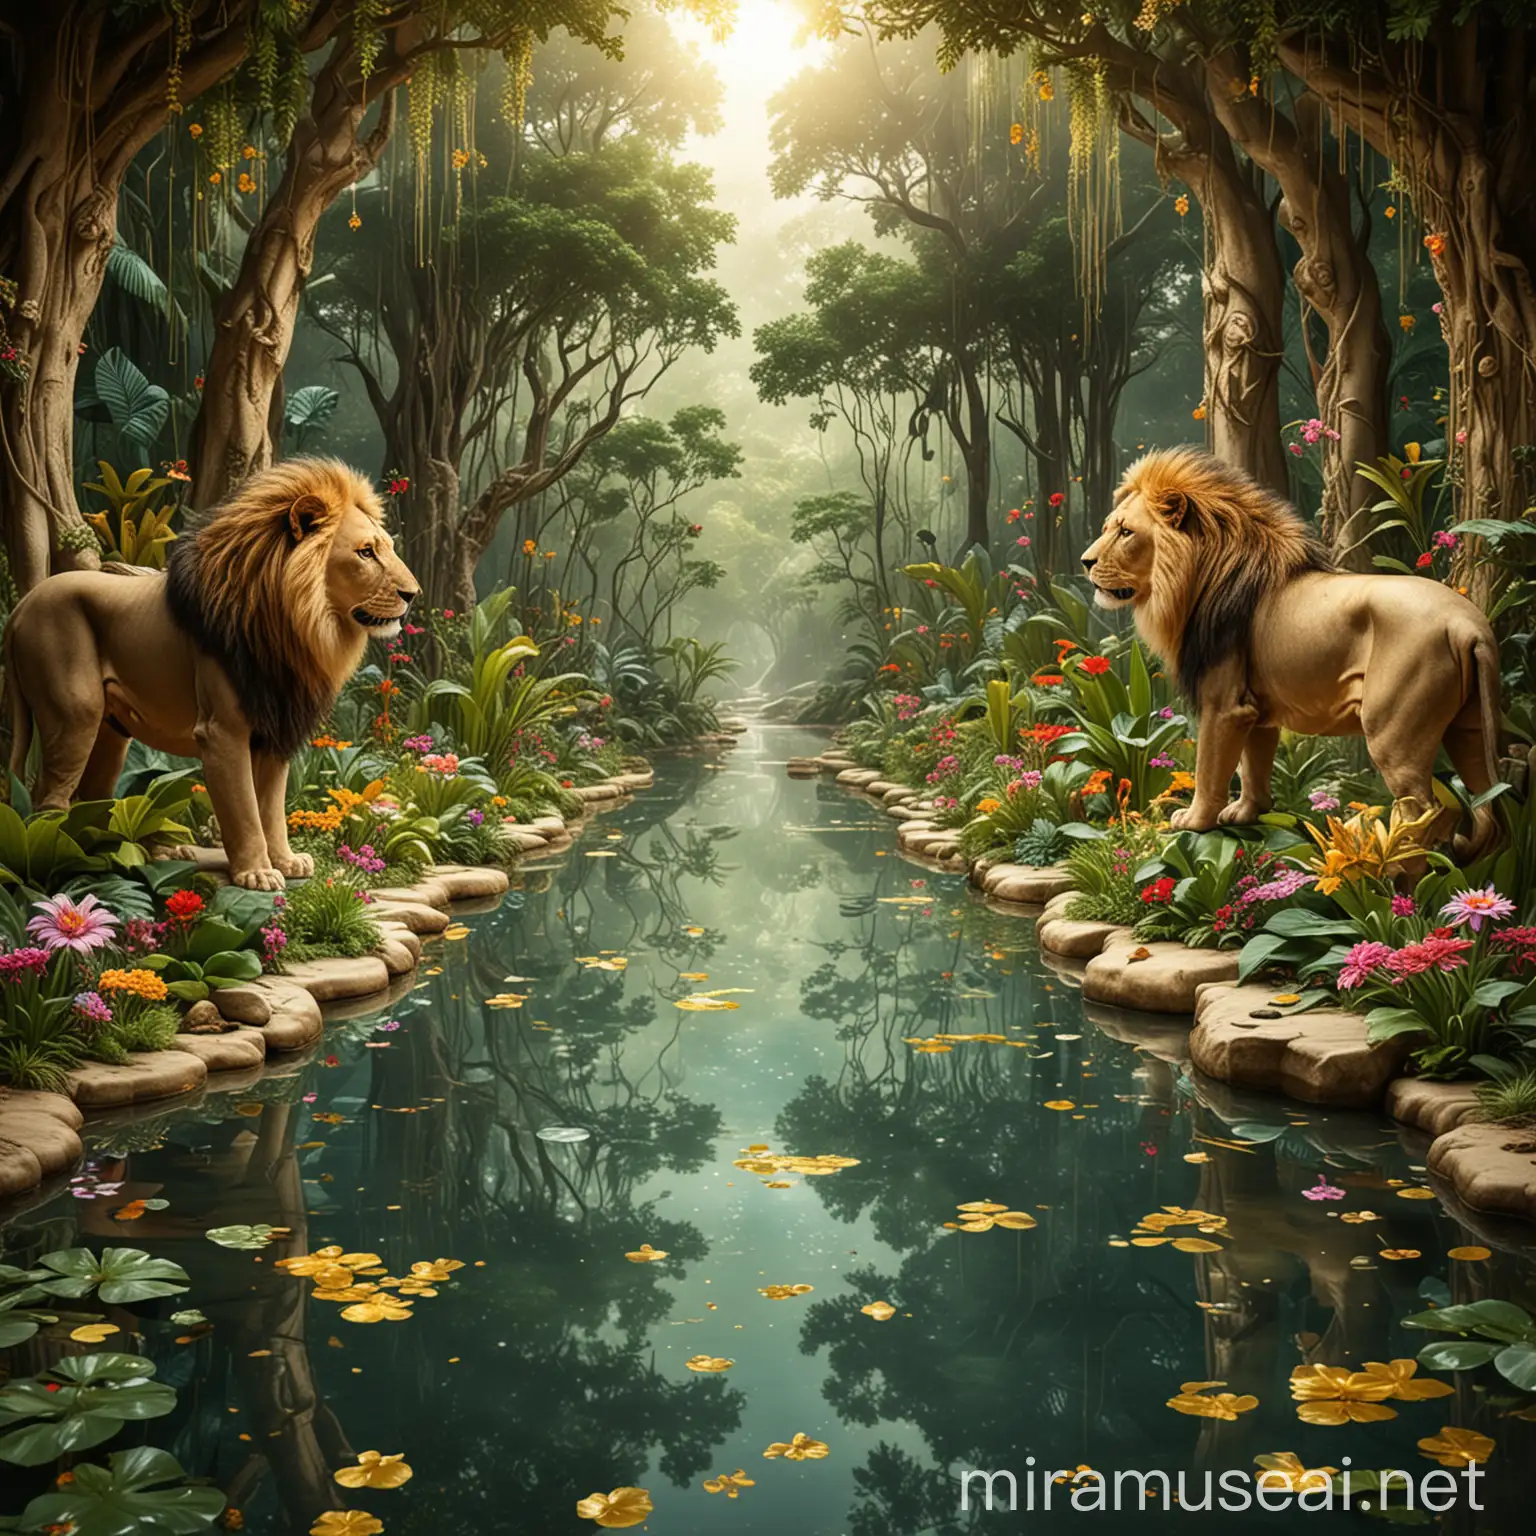 Magical Jungle with Lions and Golden Glass Floor